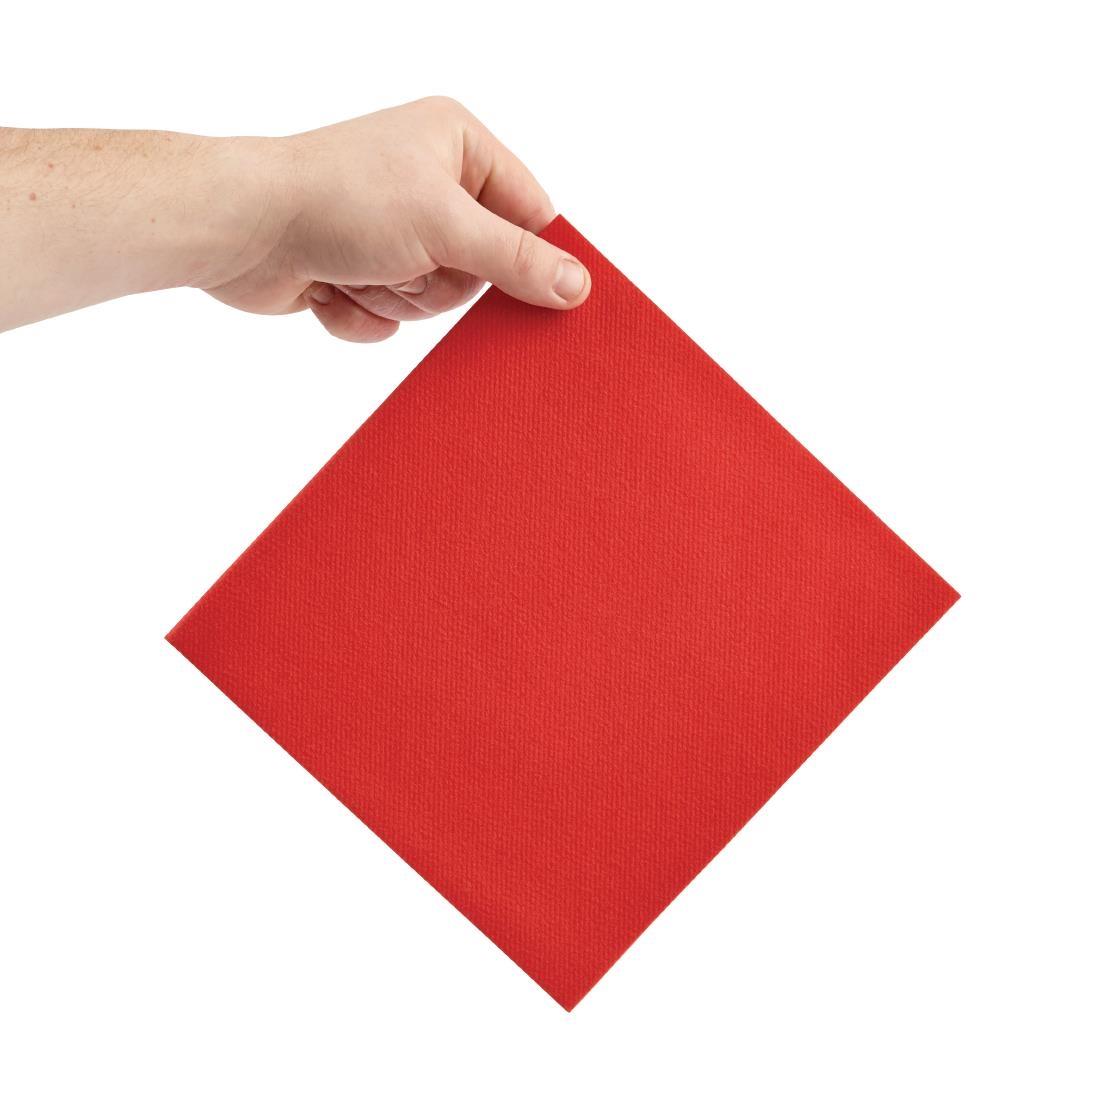 Fiesta Recyclable Premium Tablin Dinner Napkin Red 40x40cm Airlaid 1/4 Fold (Pack of 500) - FE267  - 3